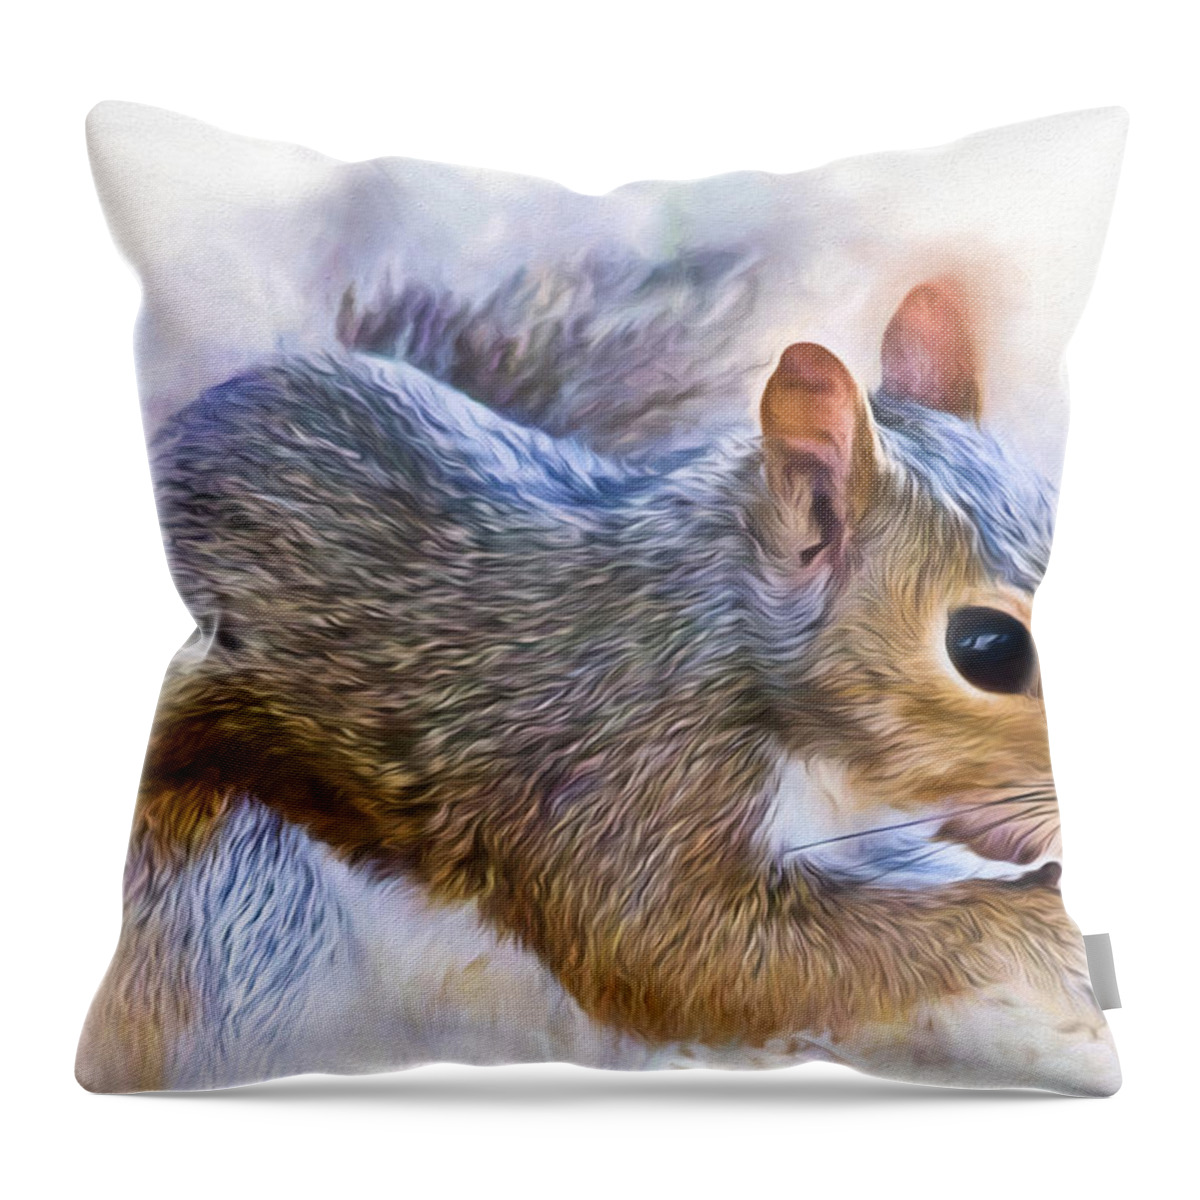 Squirrel Throw Pillow featuring the photograph Another Peanut Please - Squirrel - Nature by Barry Jones